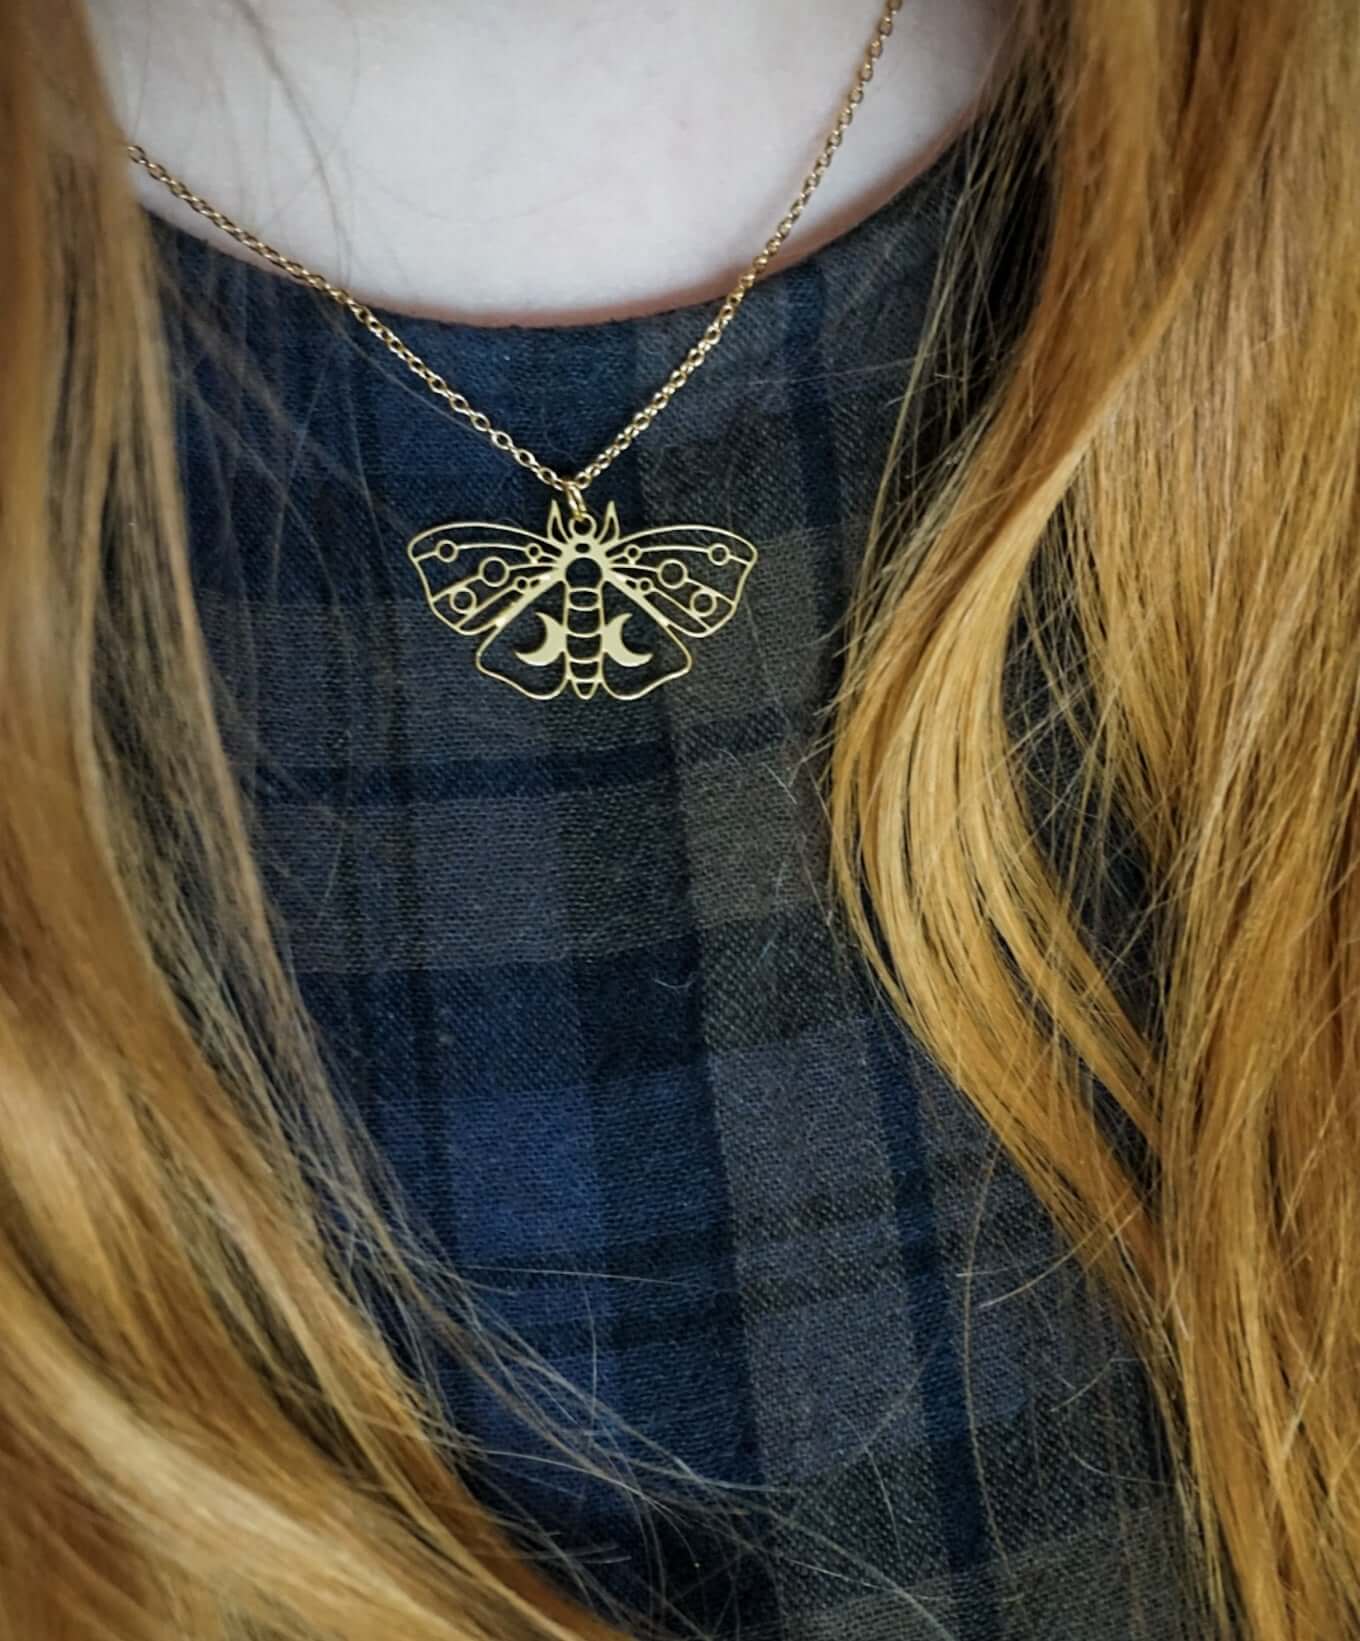 Golden Moth and Star necklace